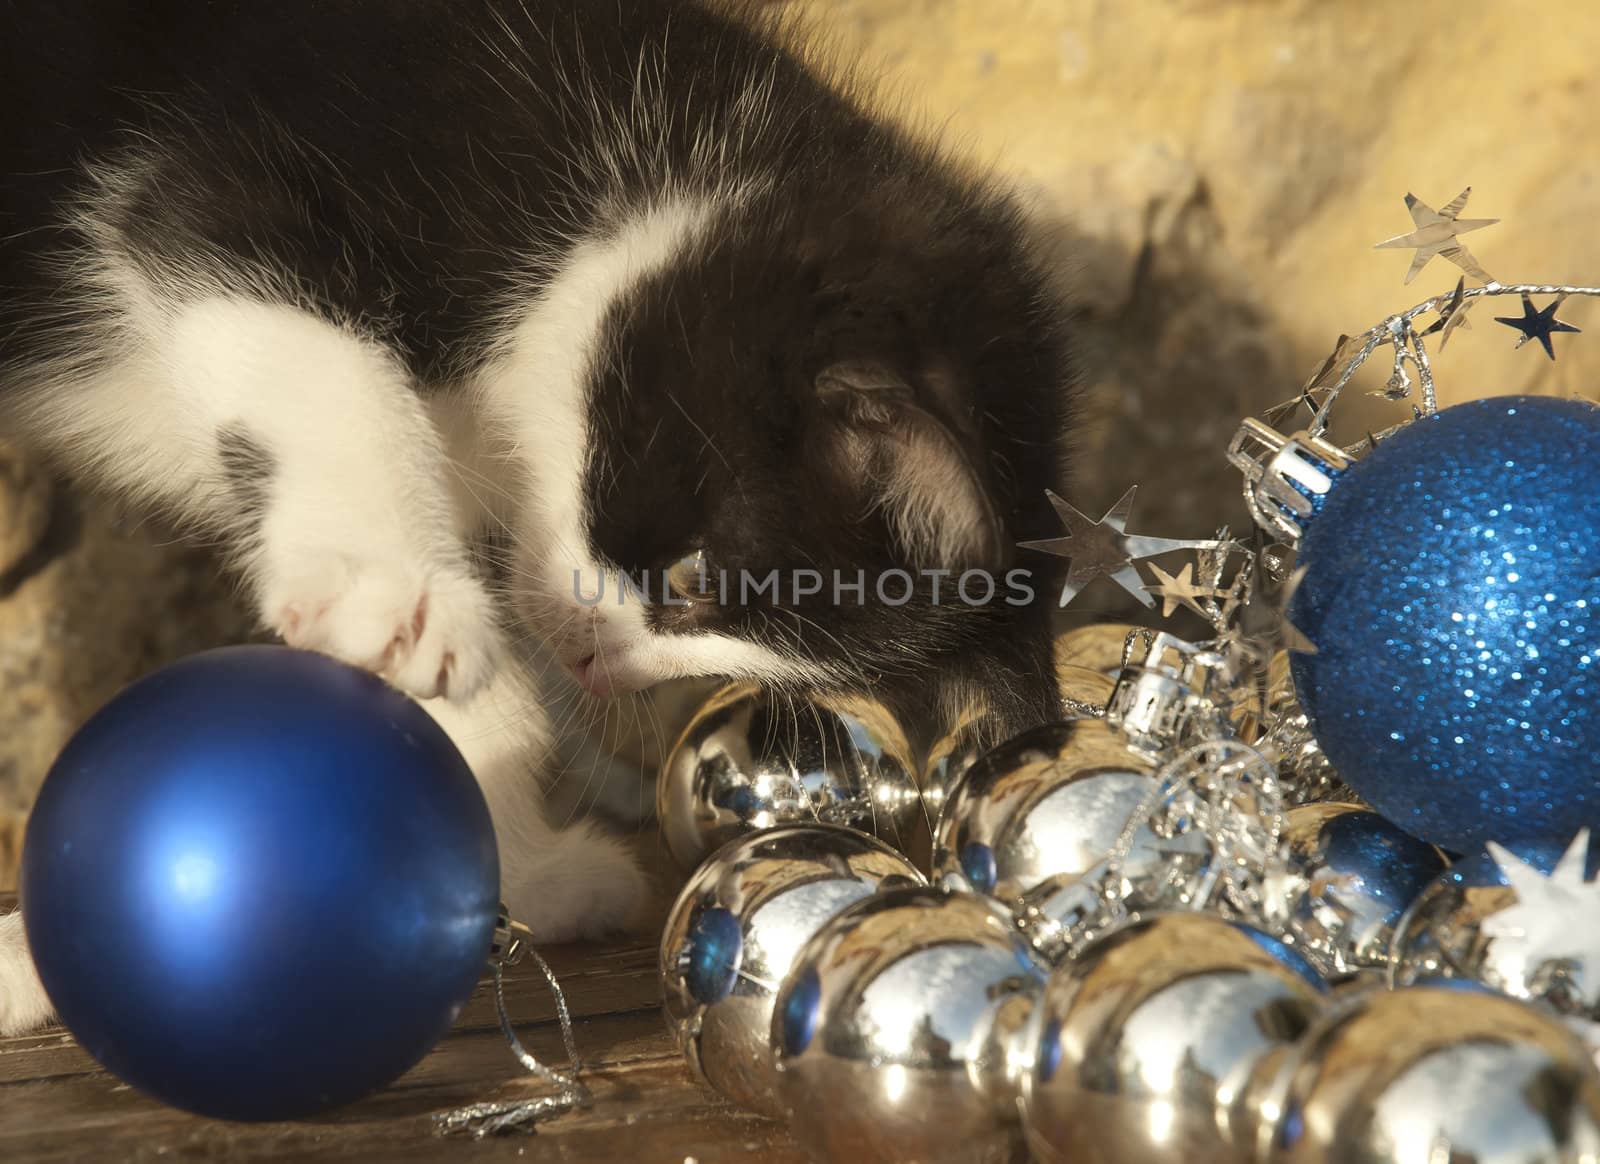 kitten playing with Christmas decorations by Carche